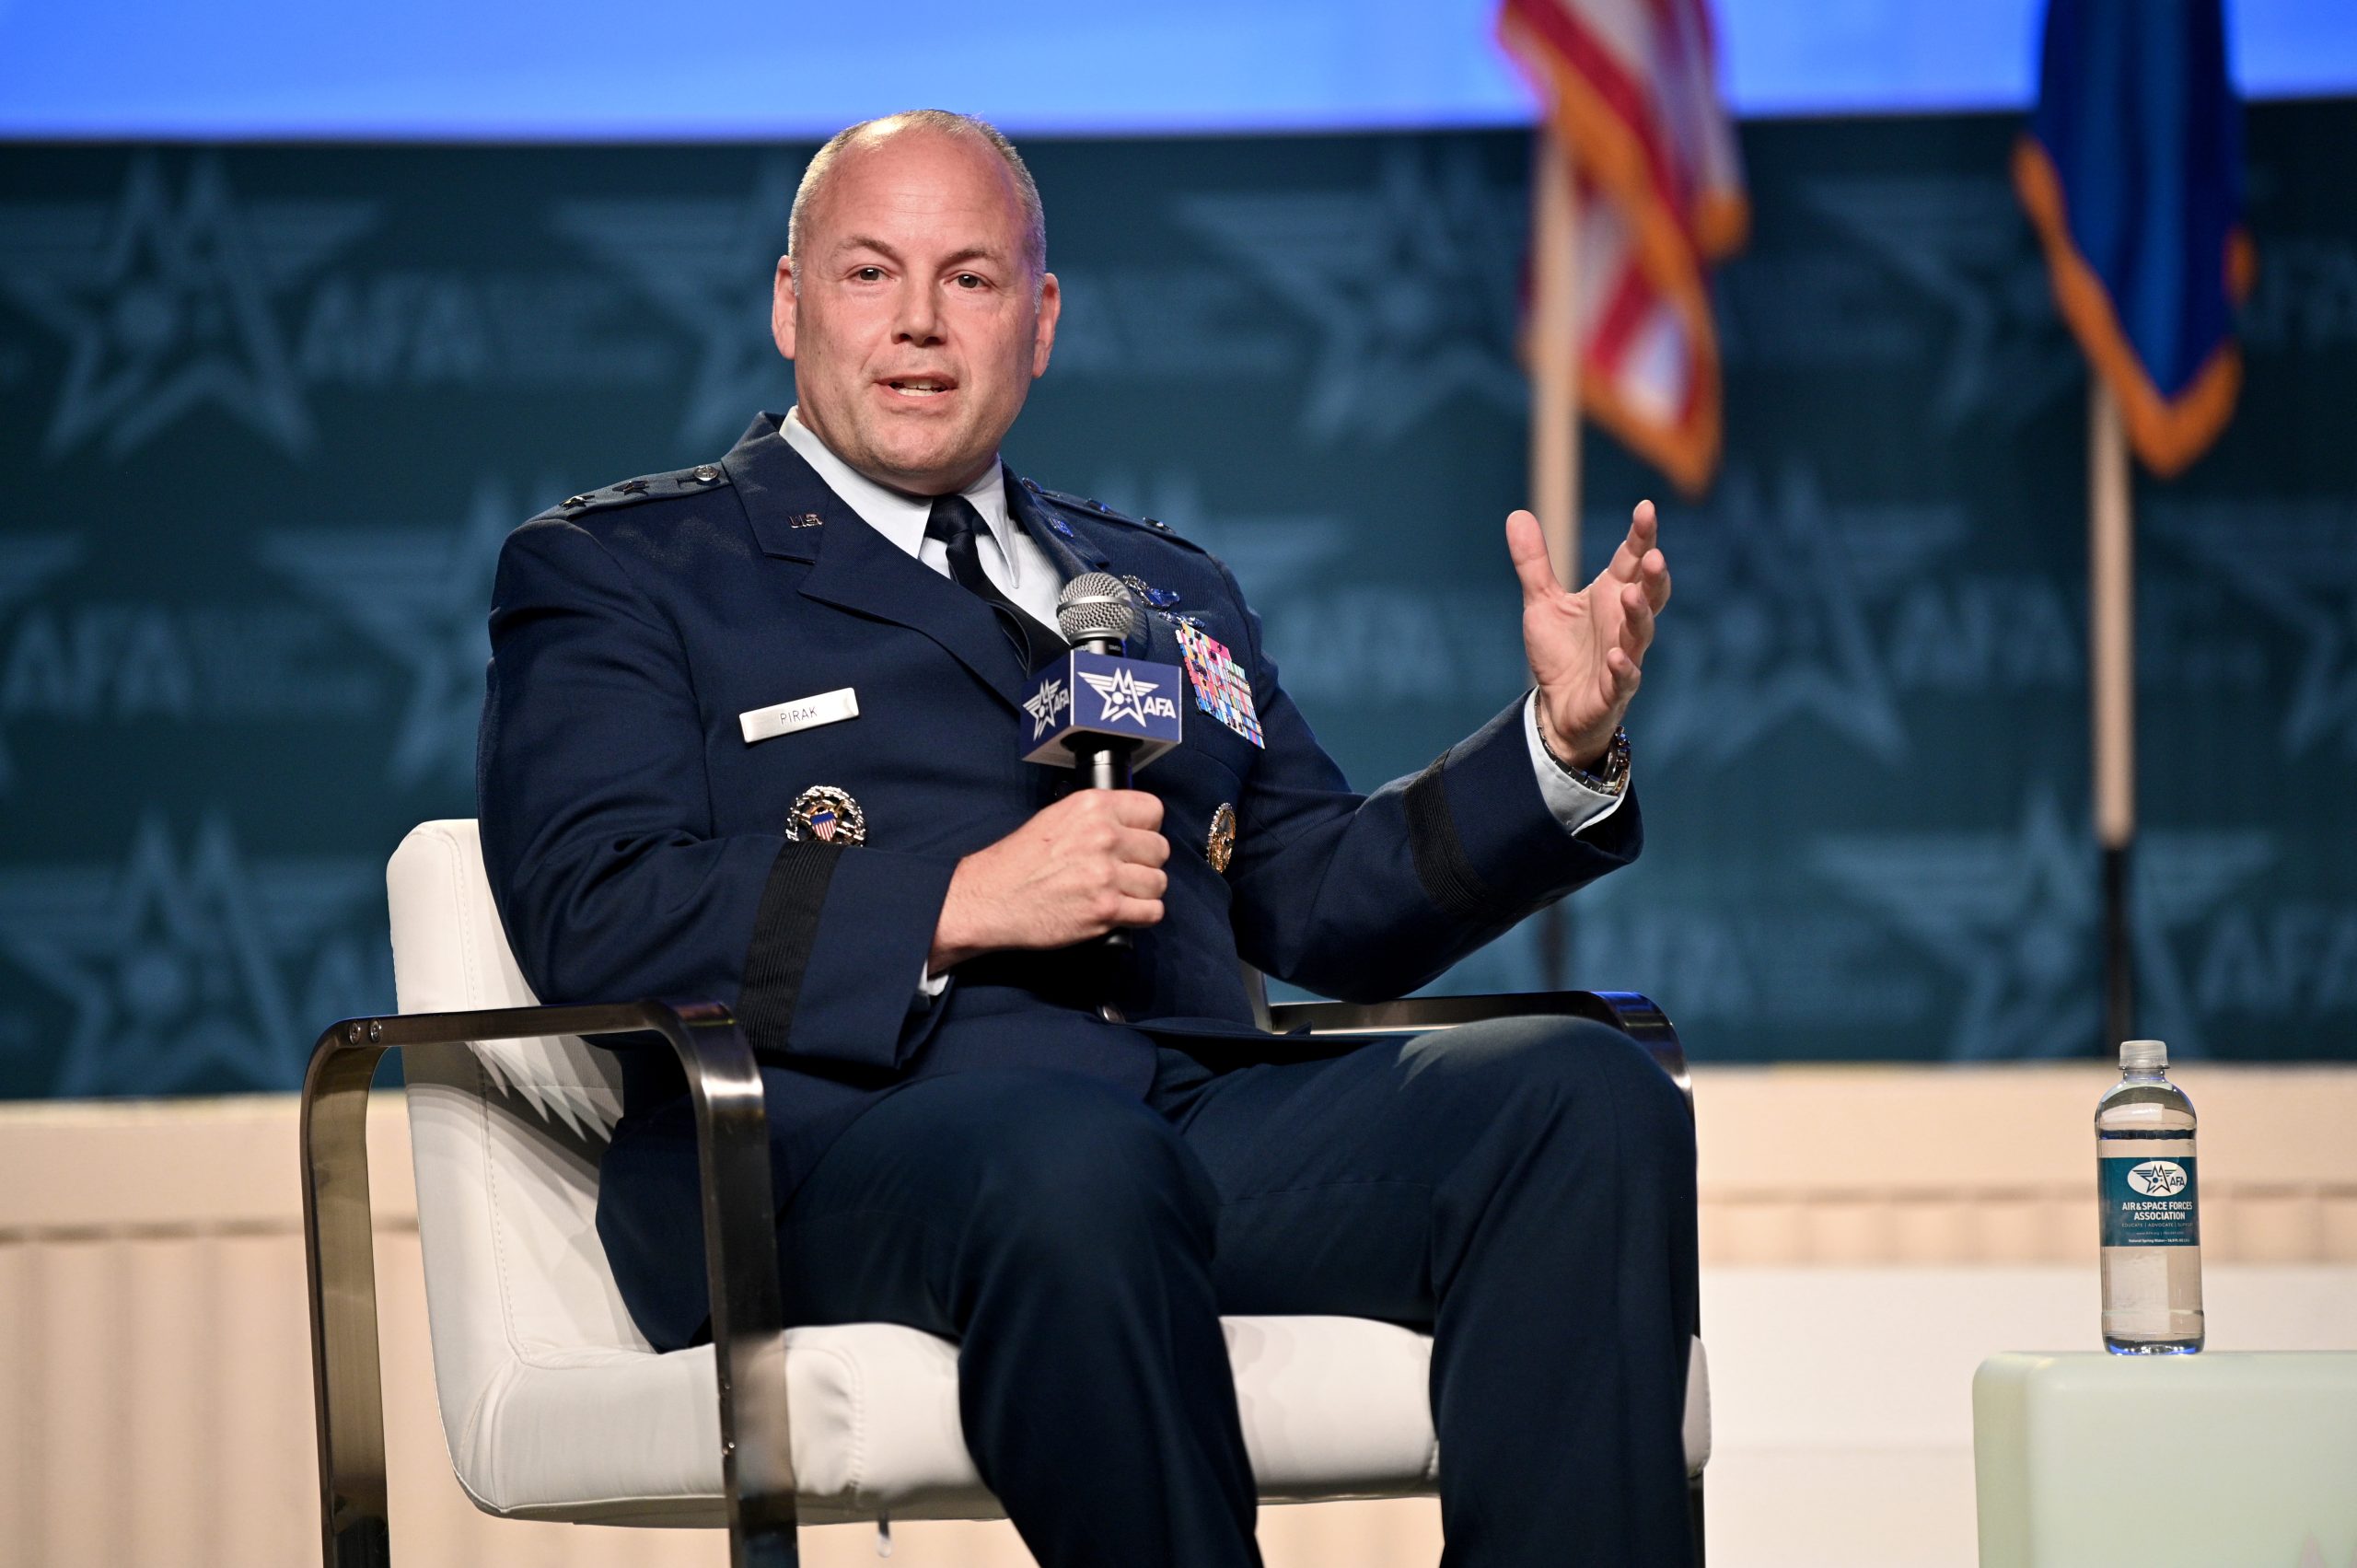 Air National Guard No. 2 Nominated to Become New Director